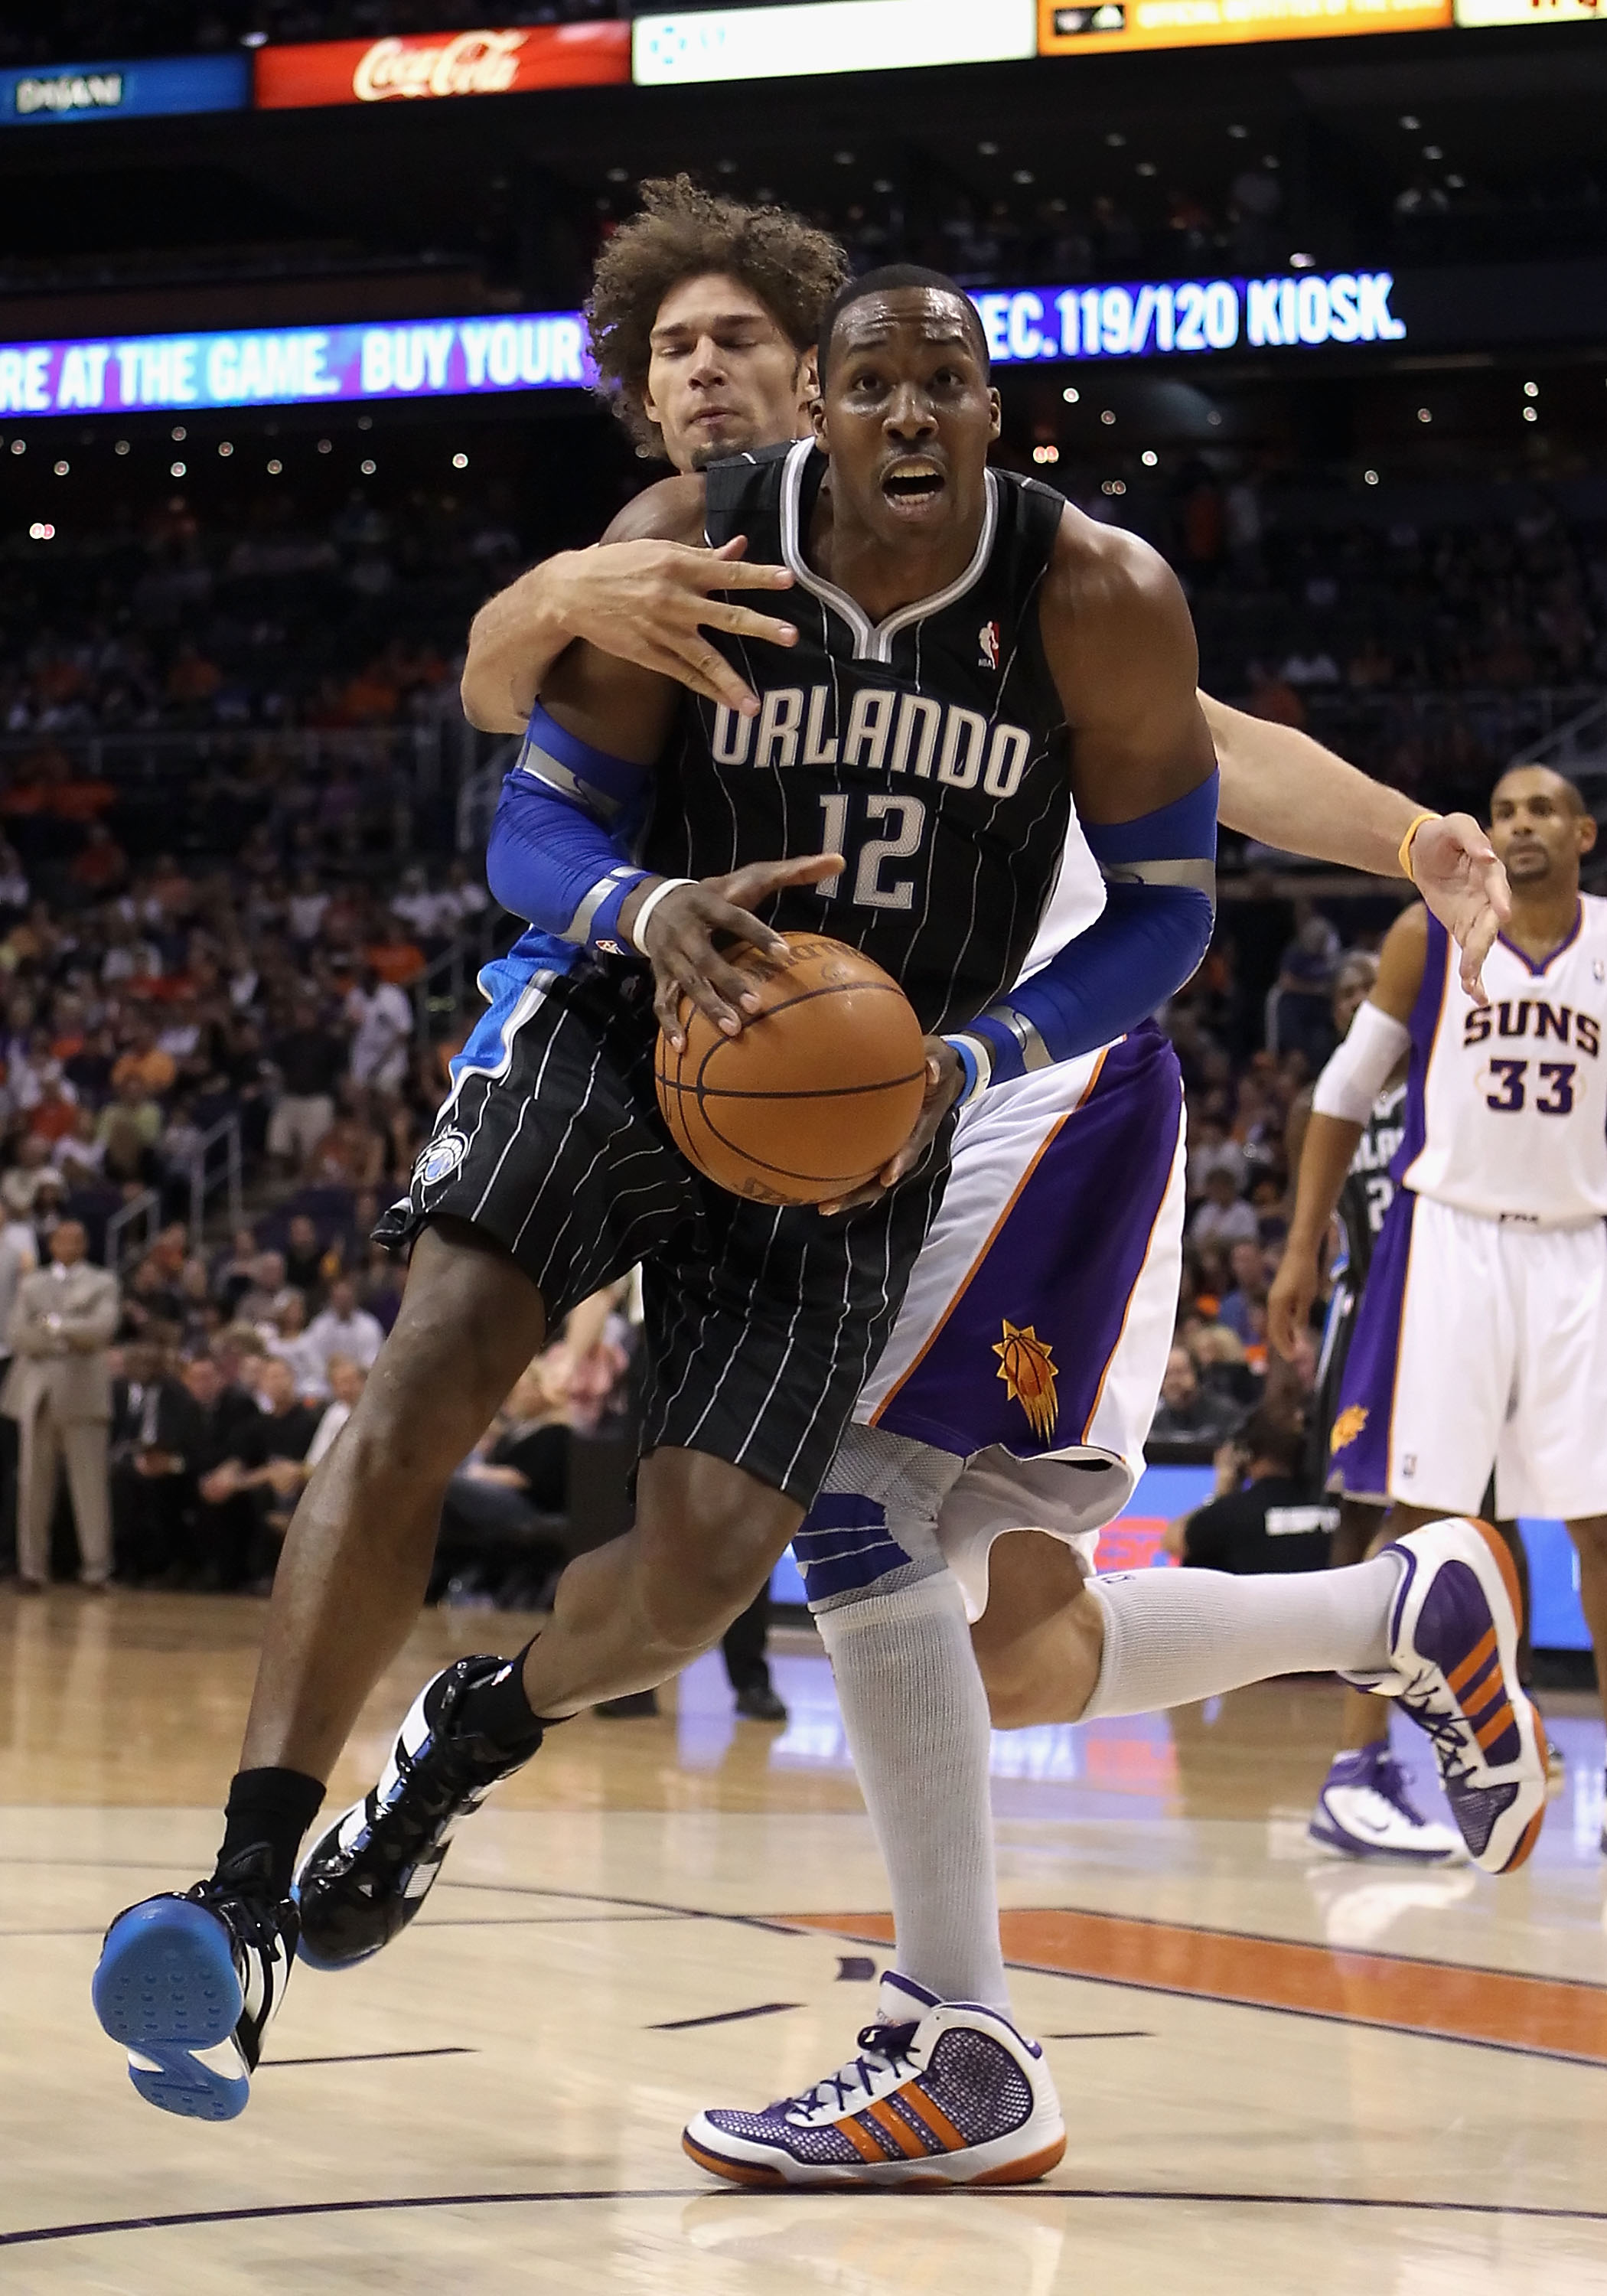 Los Angeles Clippers: Please, stay far away from Dwight Howard